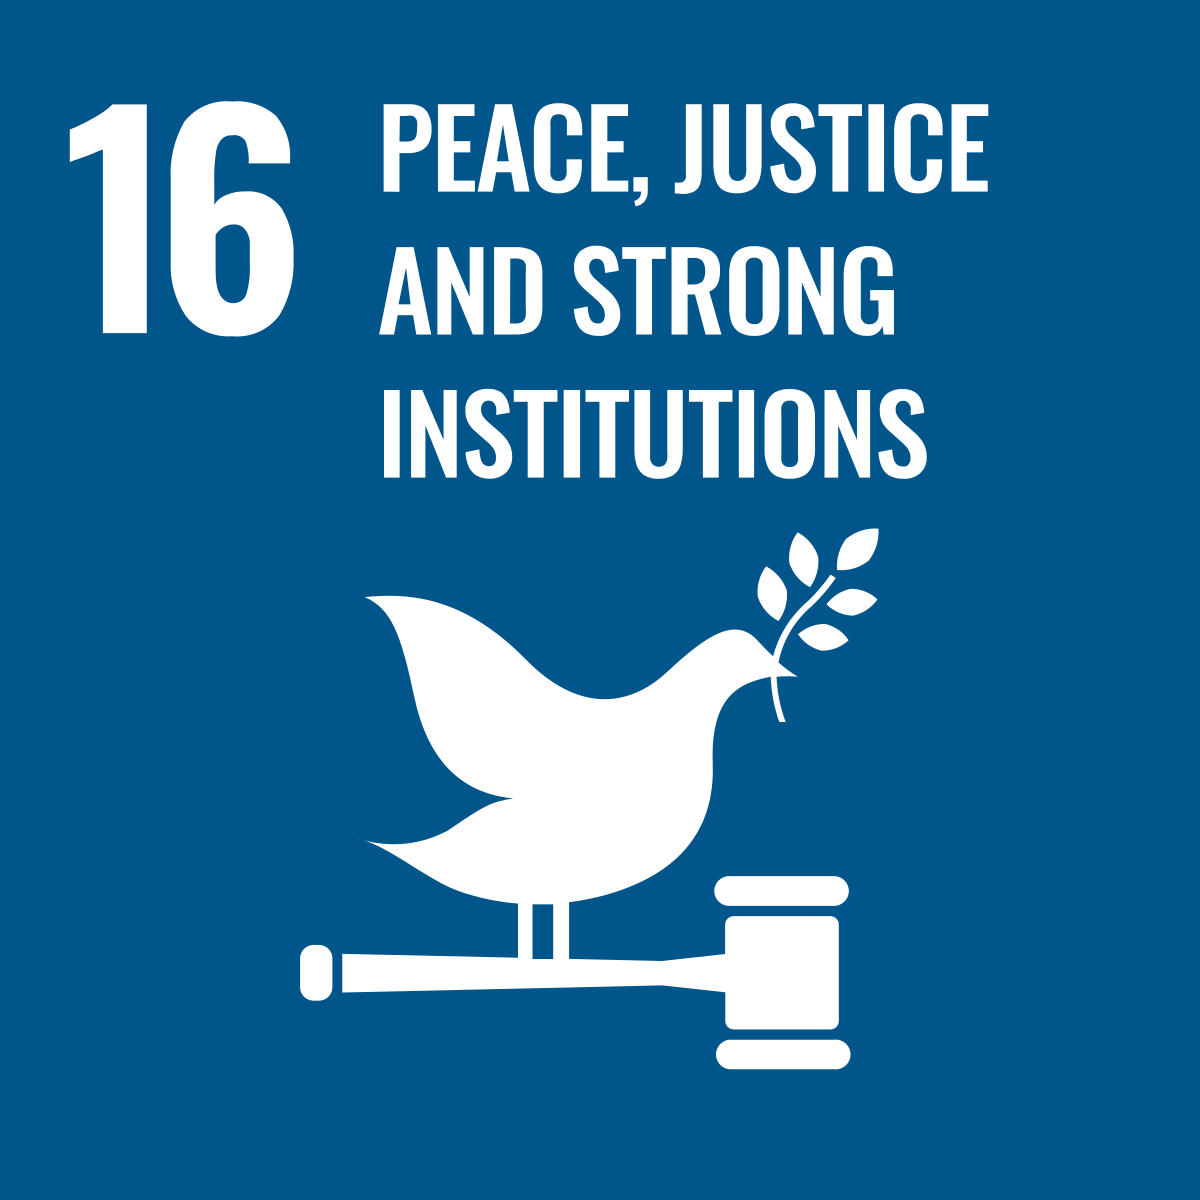 WRITE AN 3000 WORD ARTICLE ON PEACE, JUSTICE AND STRONG INSTITUTIONS